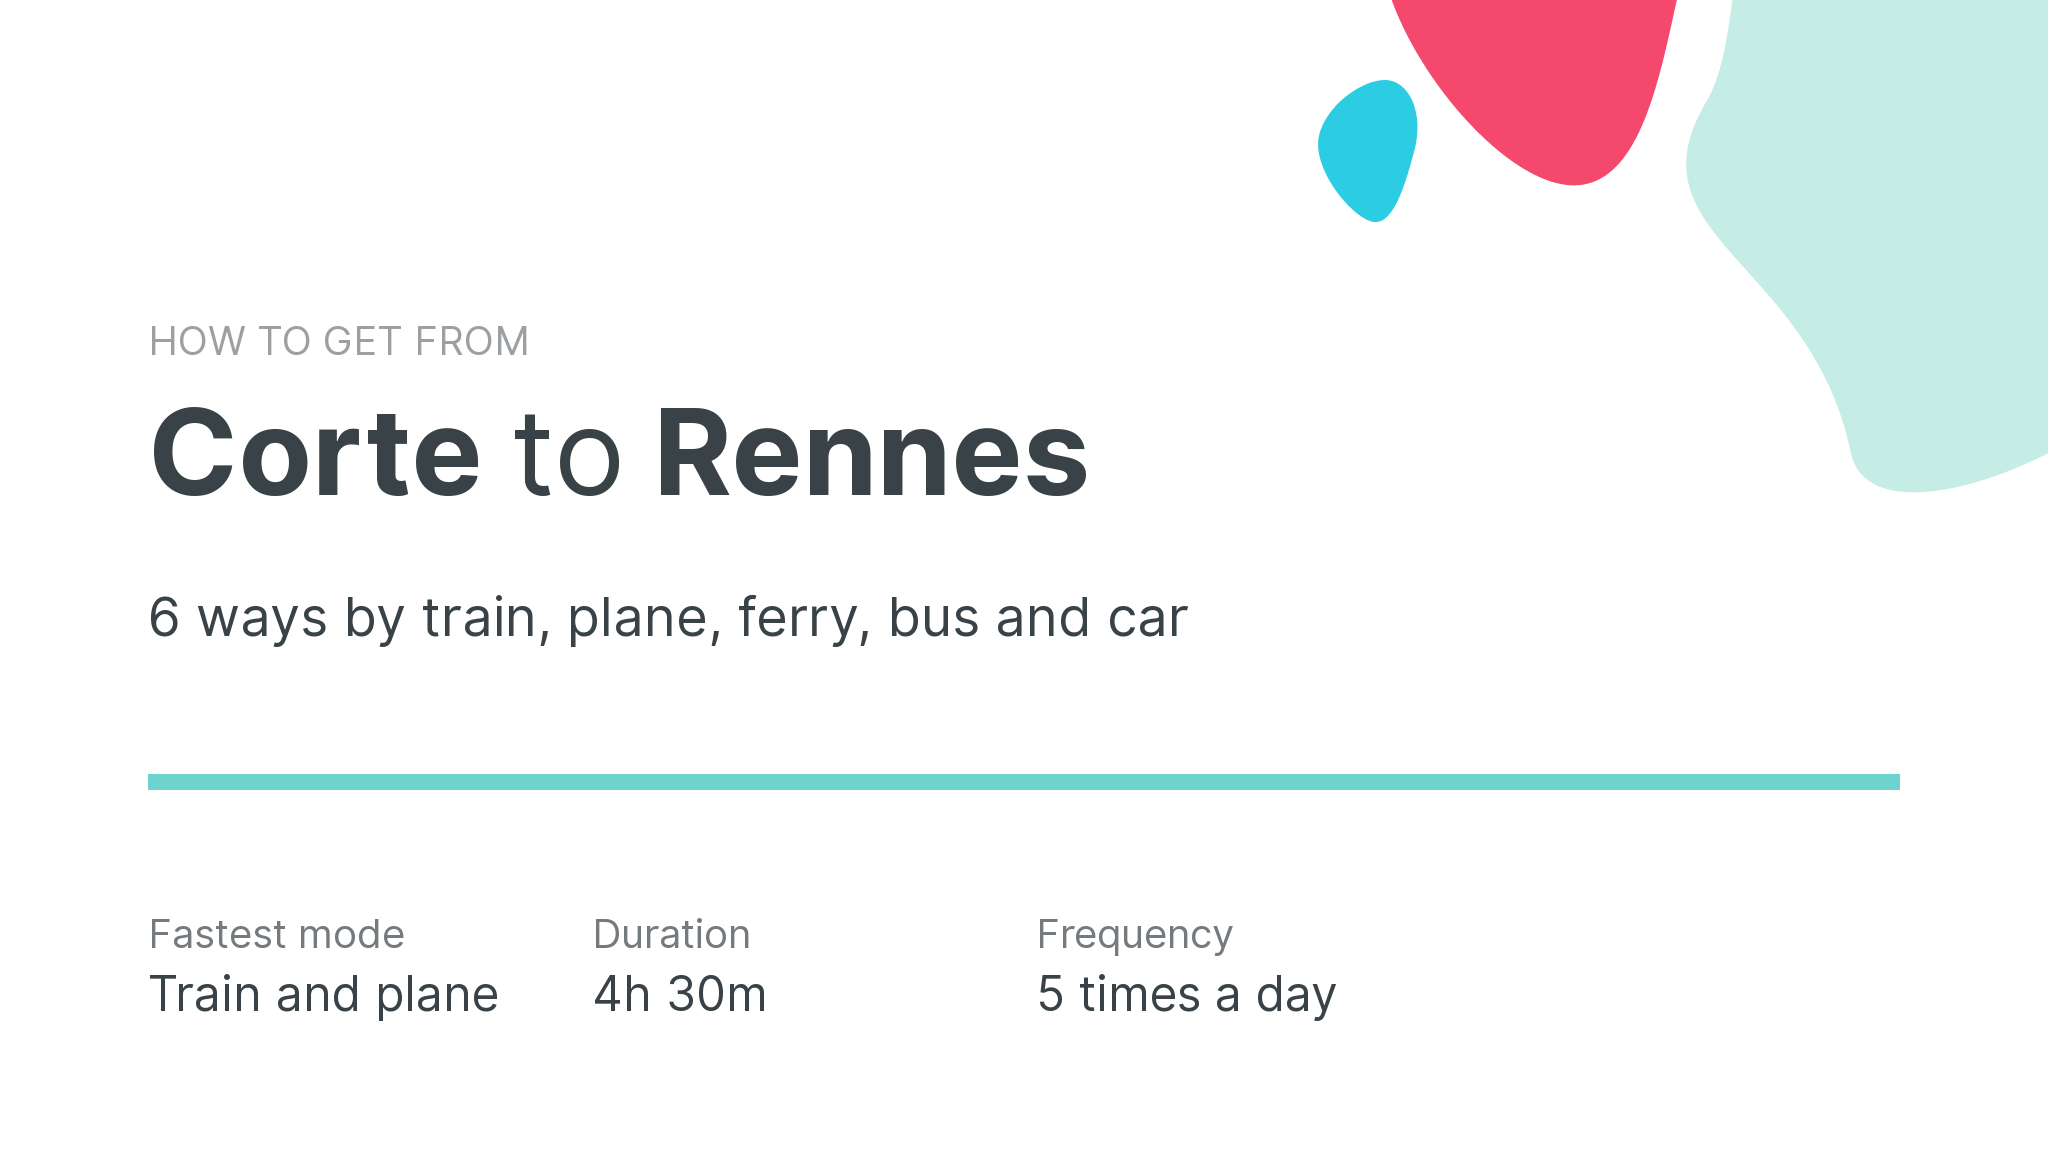 How do I get from Corte to Rennes